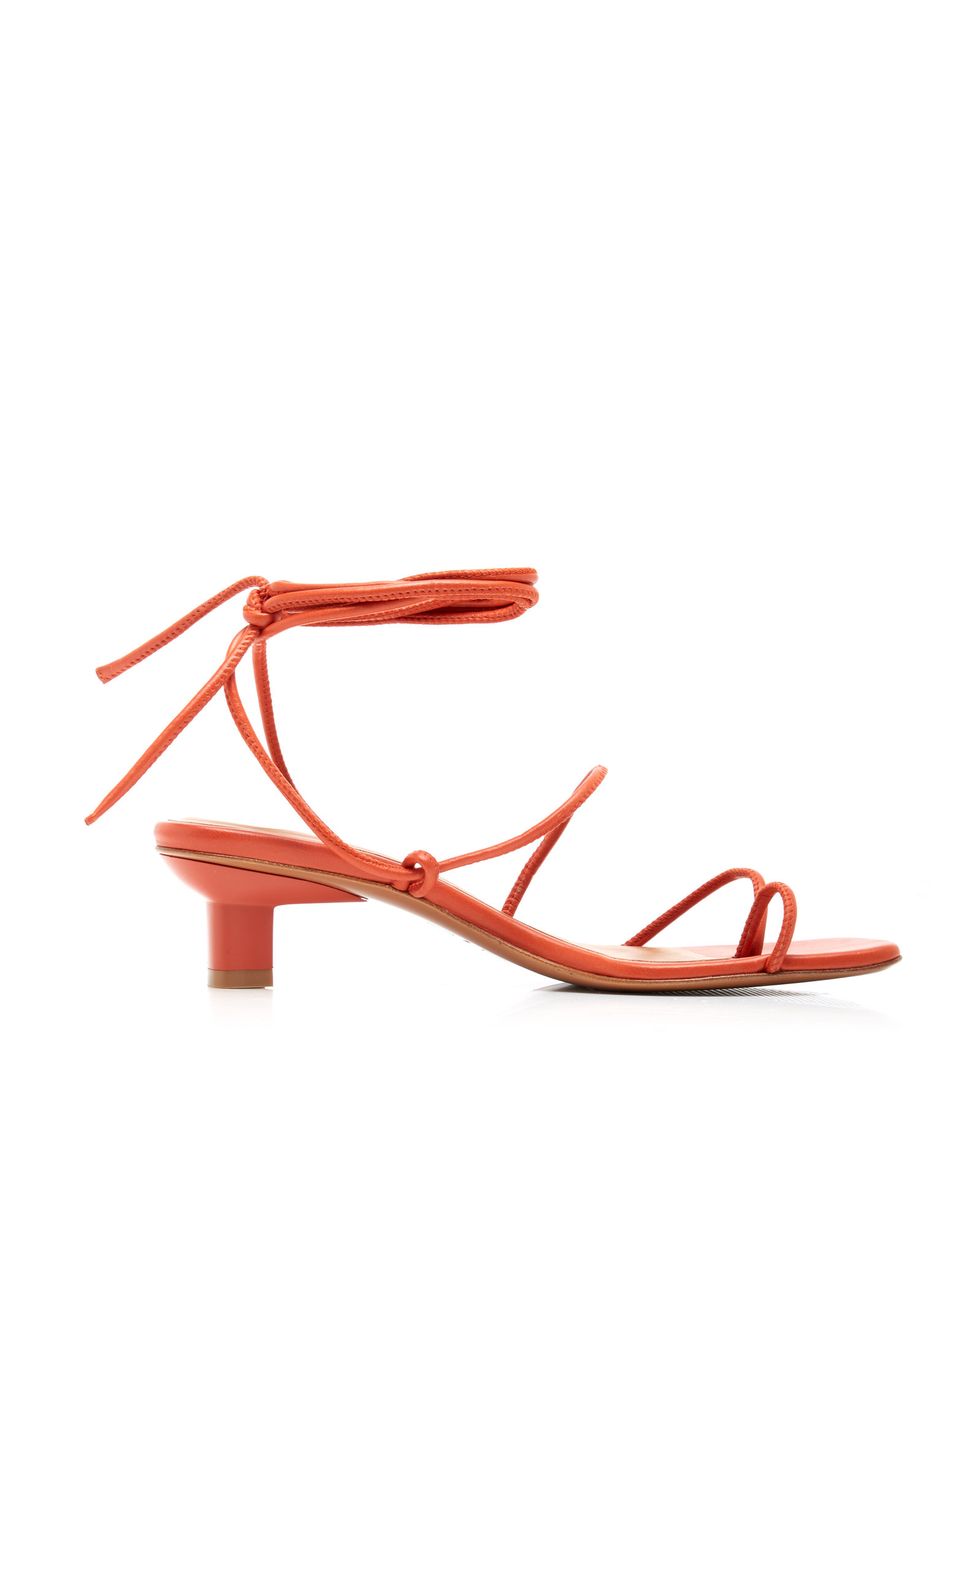 Roma Leather Lace-Up Sandals by LoQ